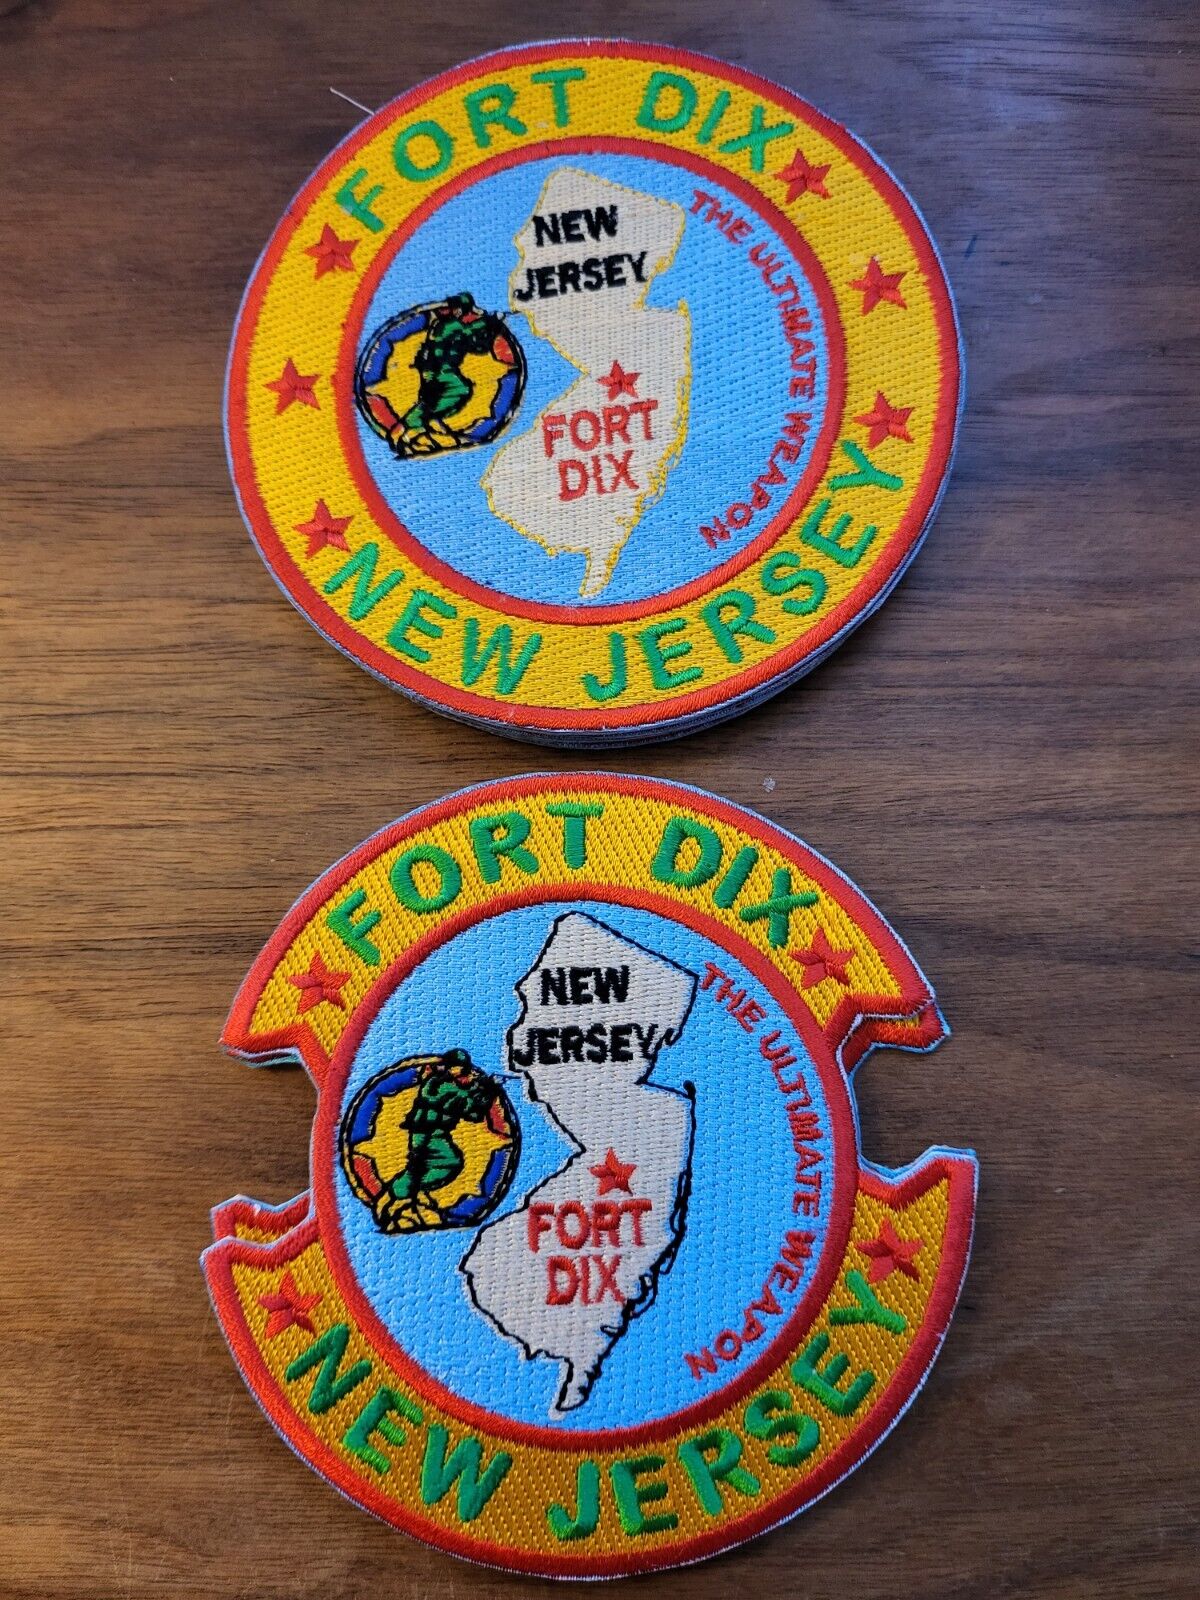 FORT DIX, US ARMY POST, NEW JERSEY